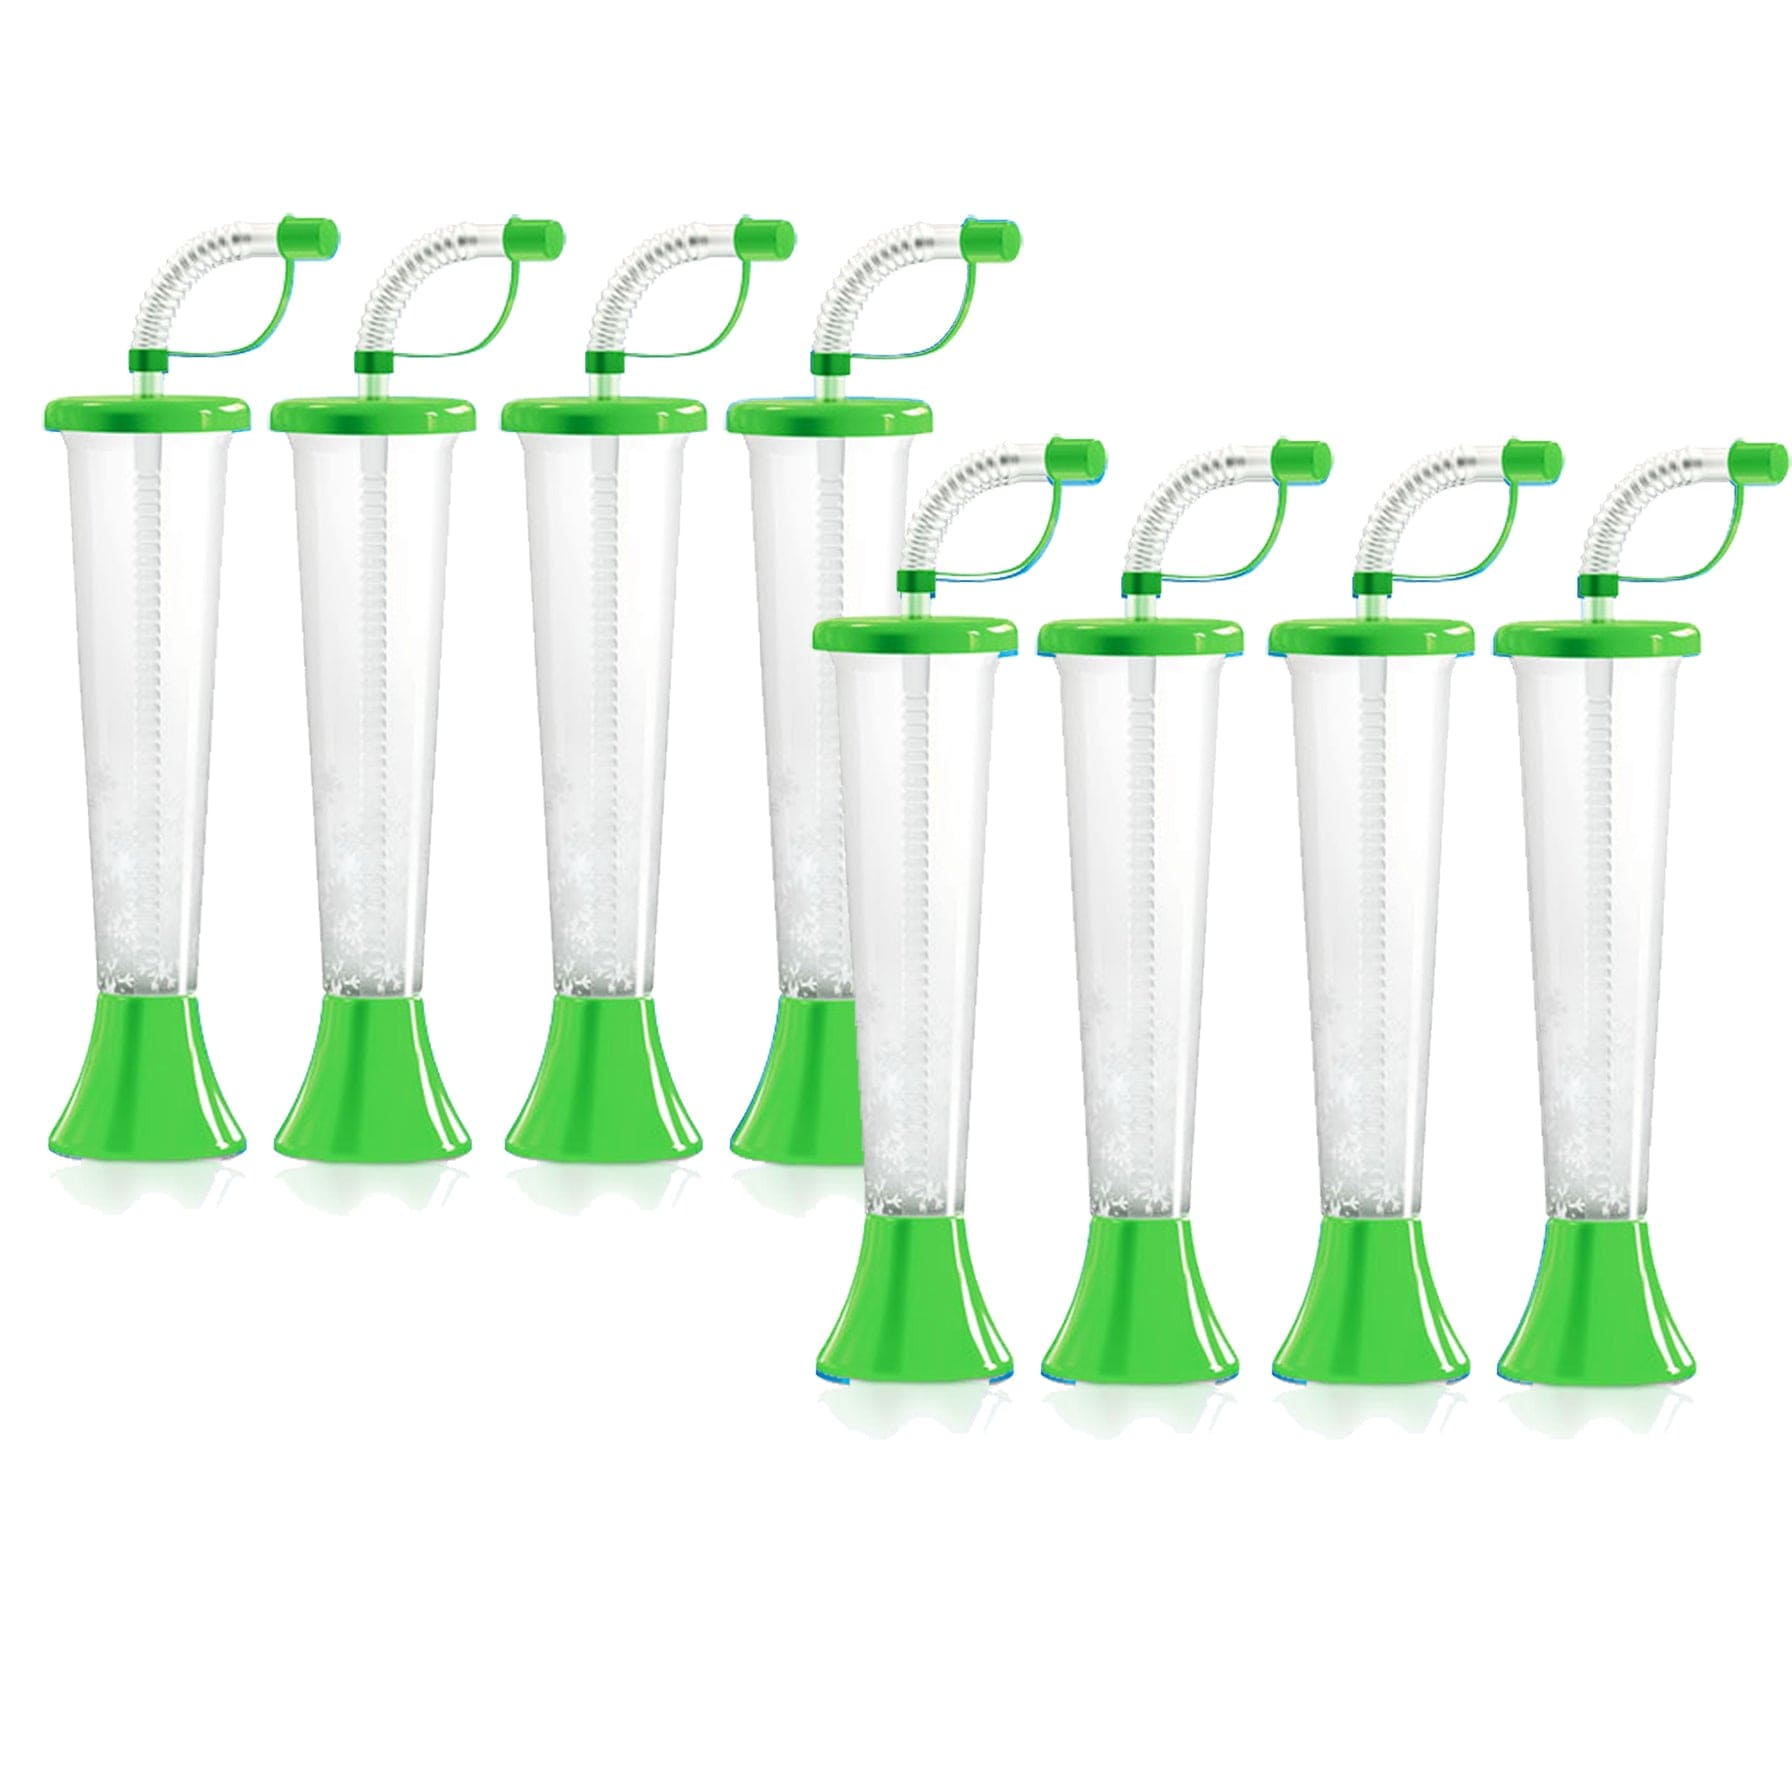 Sweet World USA Yard Cups Party Pack Yard Cups for Kids (108 LIME Cups) - for Cold Drinks, Frozen Drinks, Kids Parties - 9 oz. (250 ml) cups with lids and straws